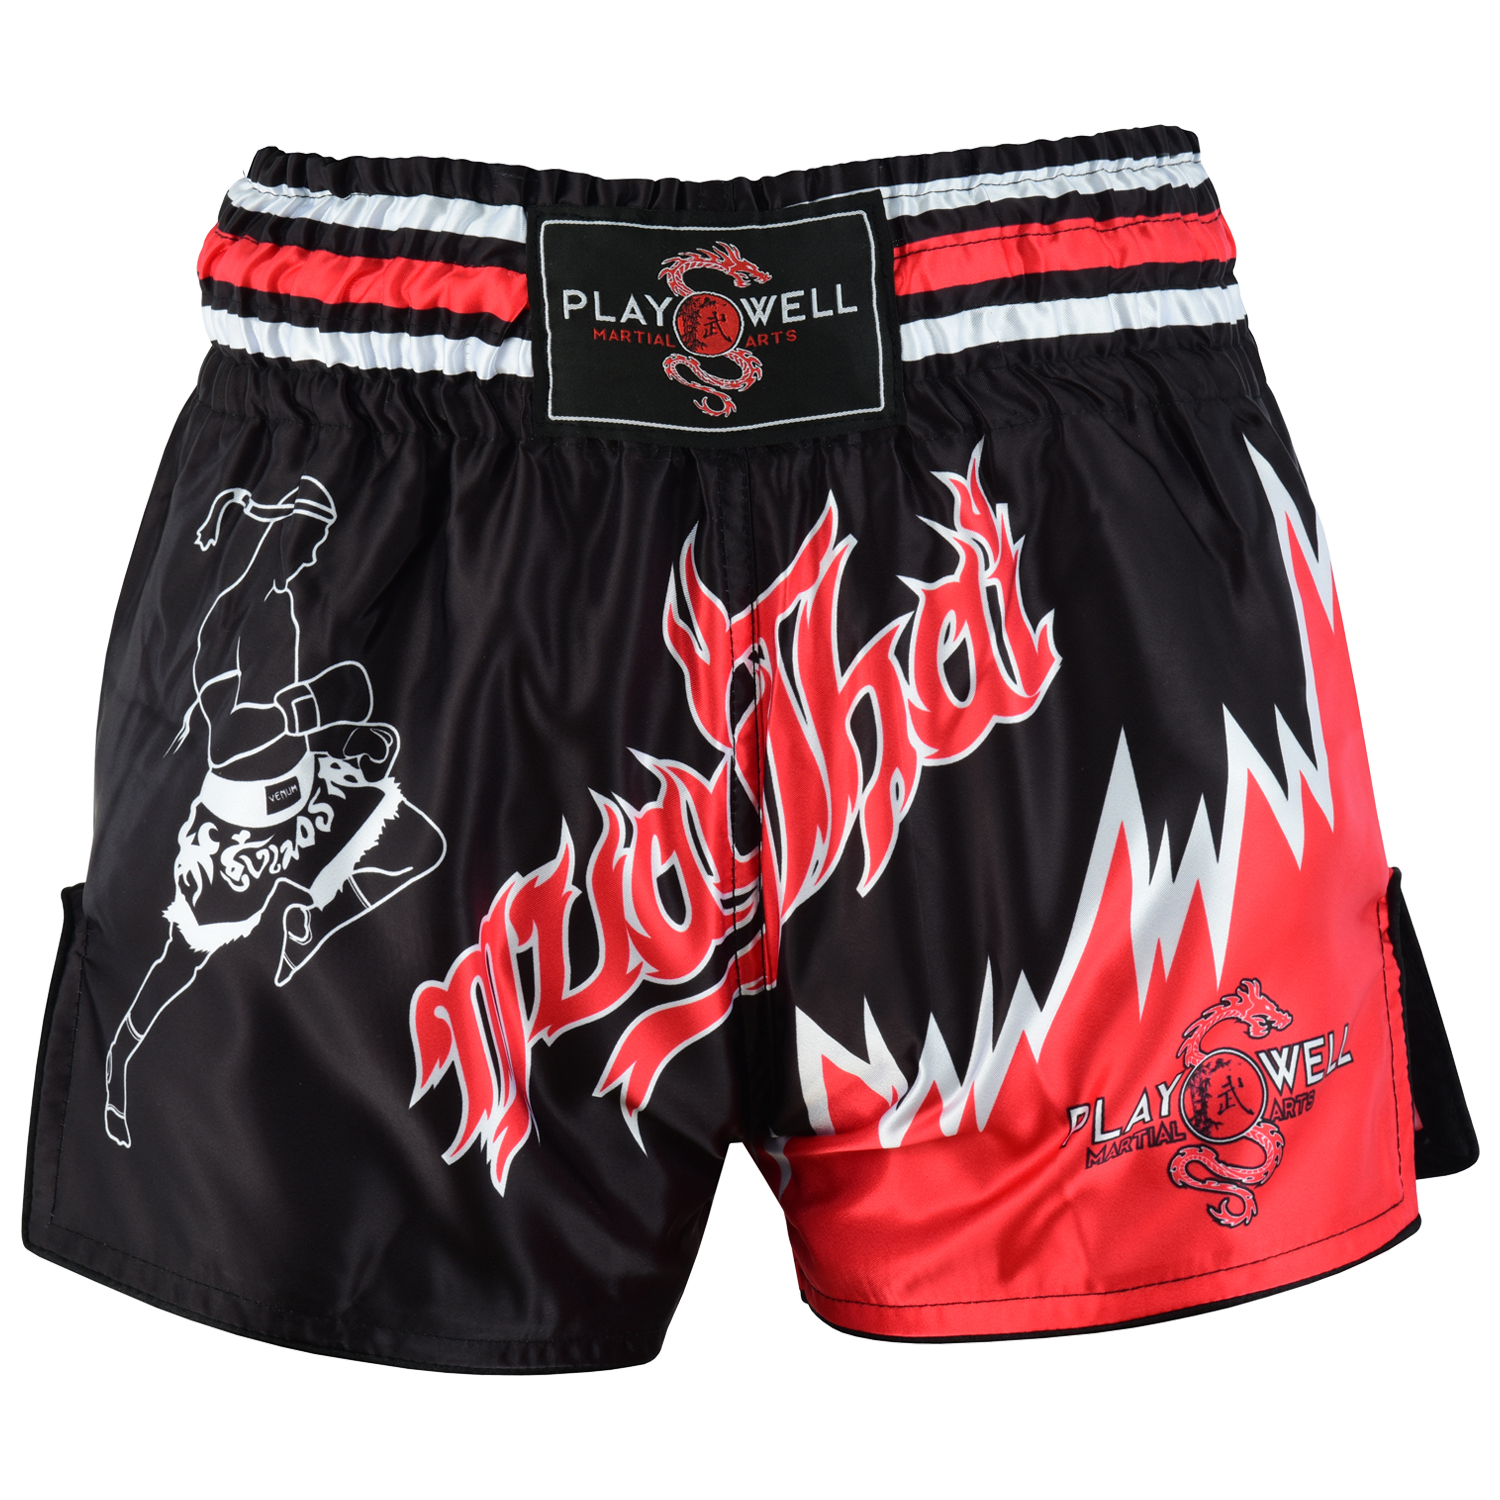 Kids Competition Muay Thai Shorts - Black/Red - Click Image to Close